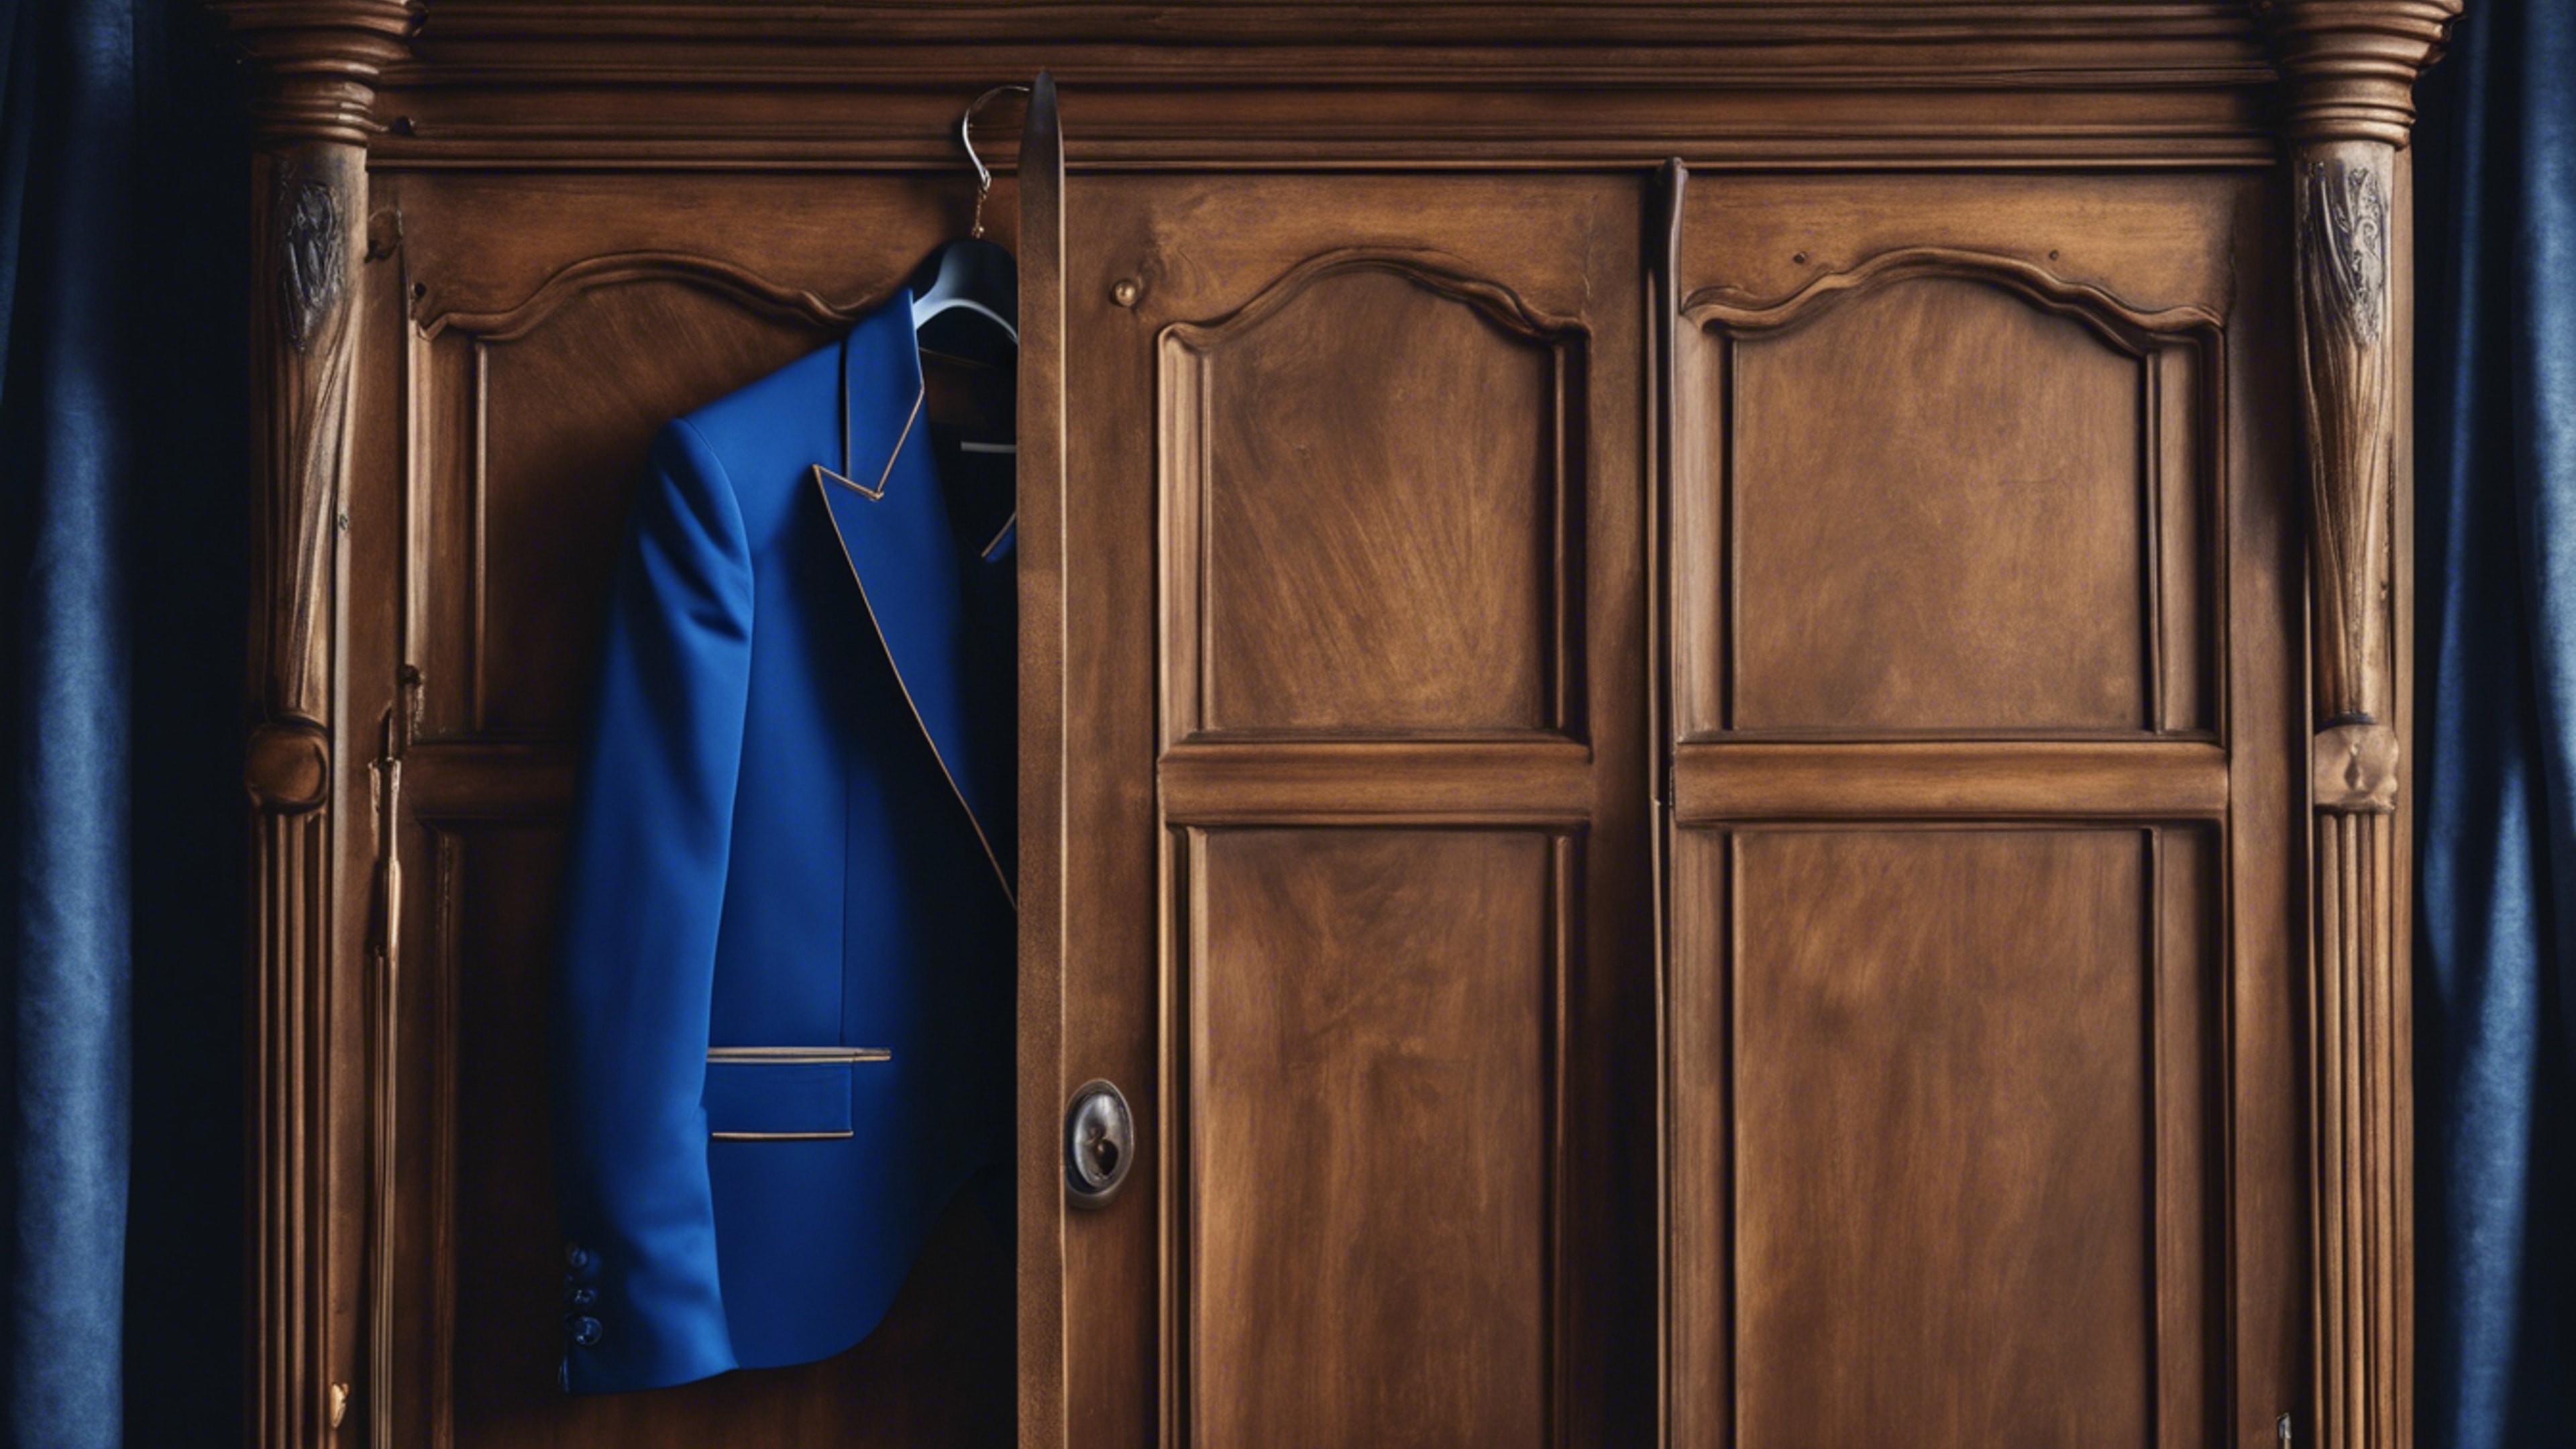 A vintage royal blue tuxedo hanging in a classic antique wardrobe.壁紙[1e18aa866c984257b969]